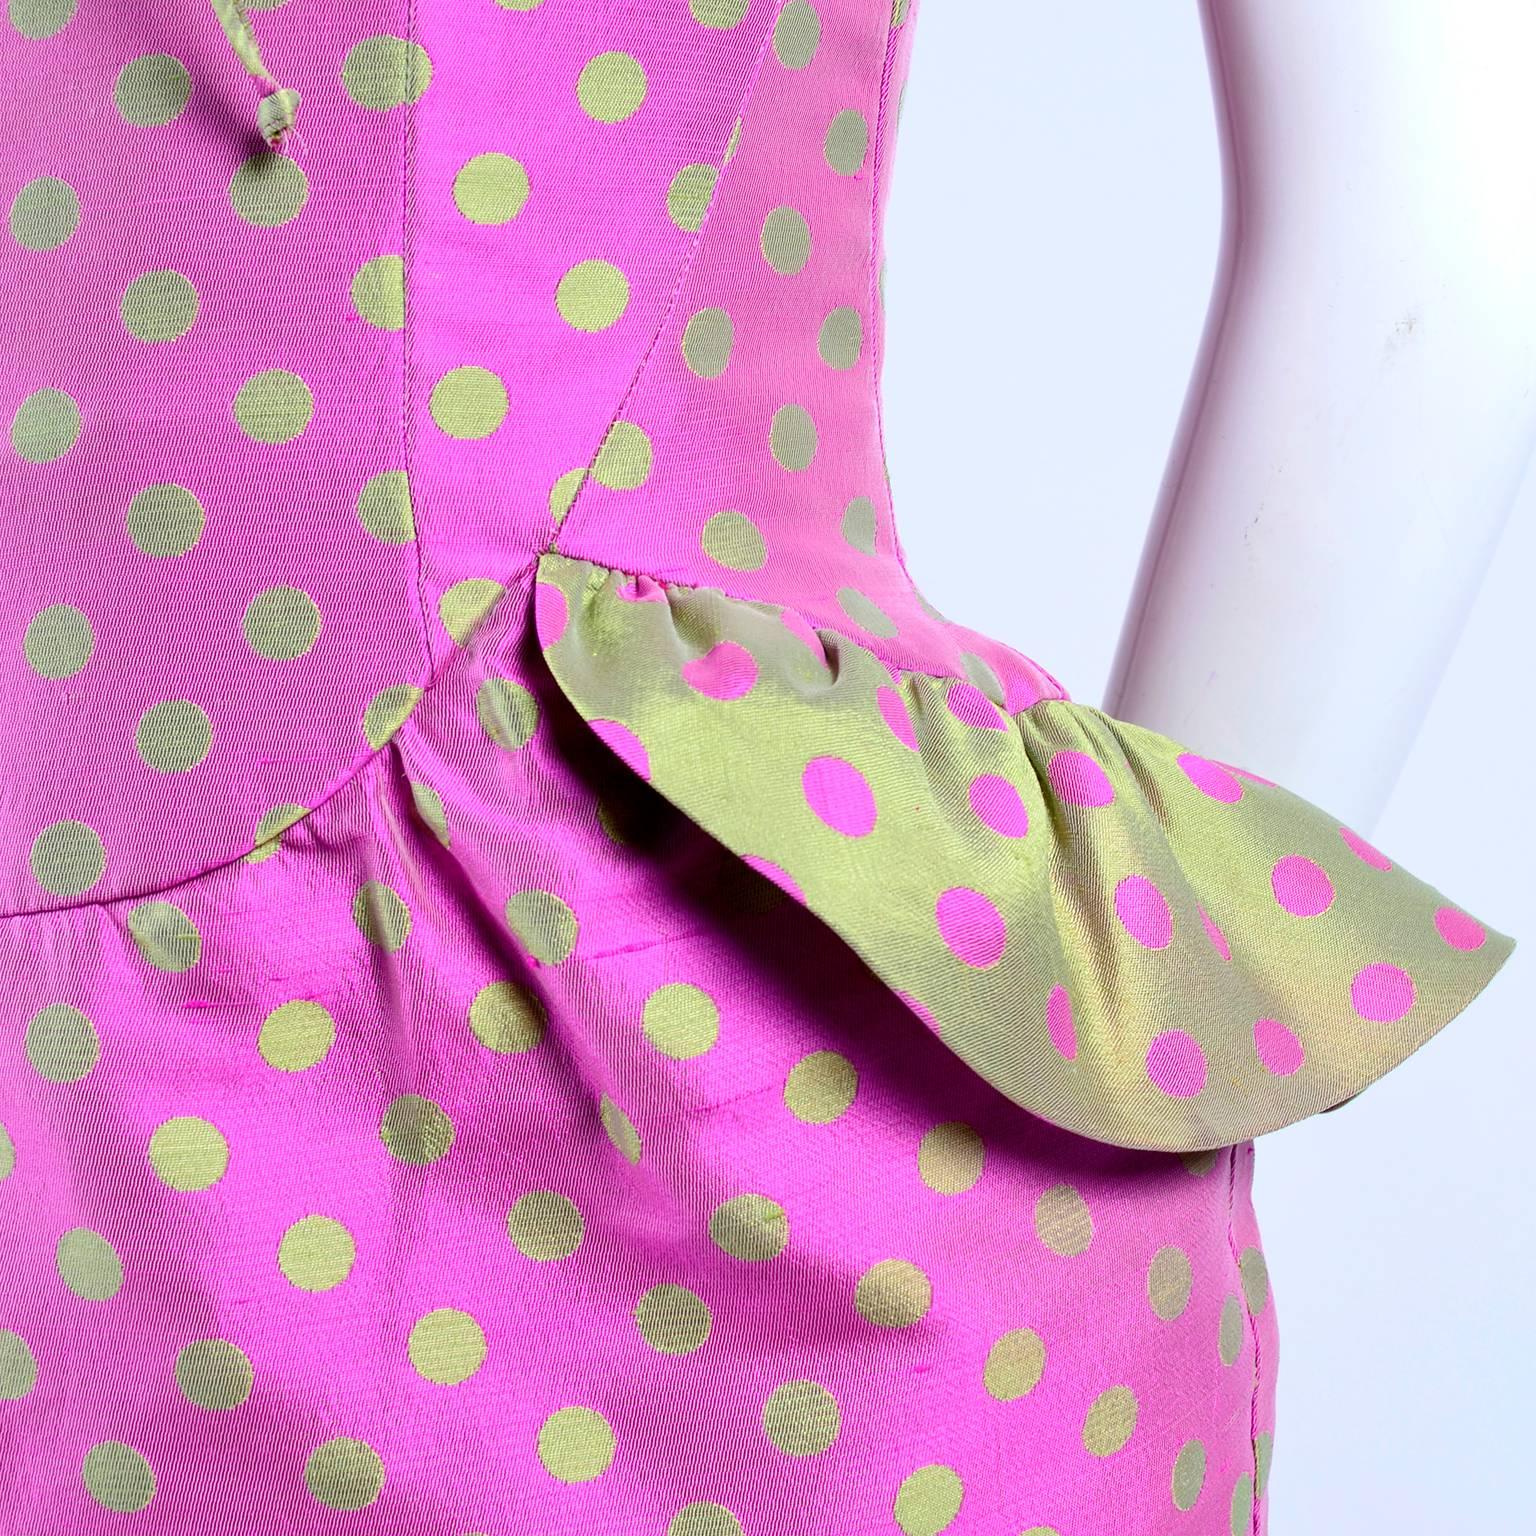 Purple Christian Lacroix Pink and Green Polka Dot Dress With Peplum and Gathered Bust